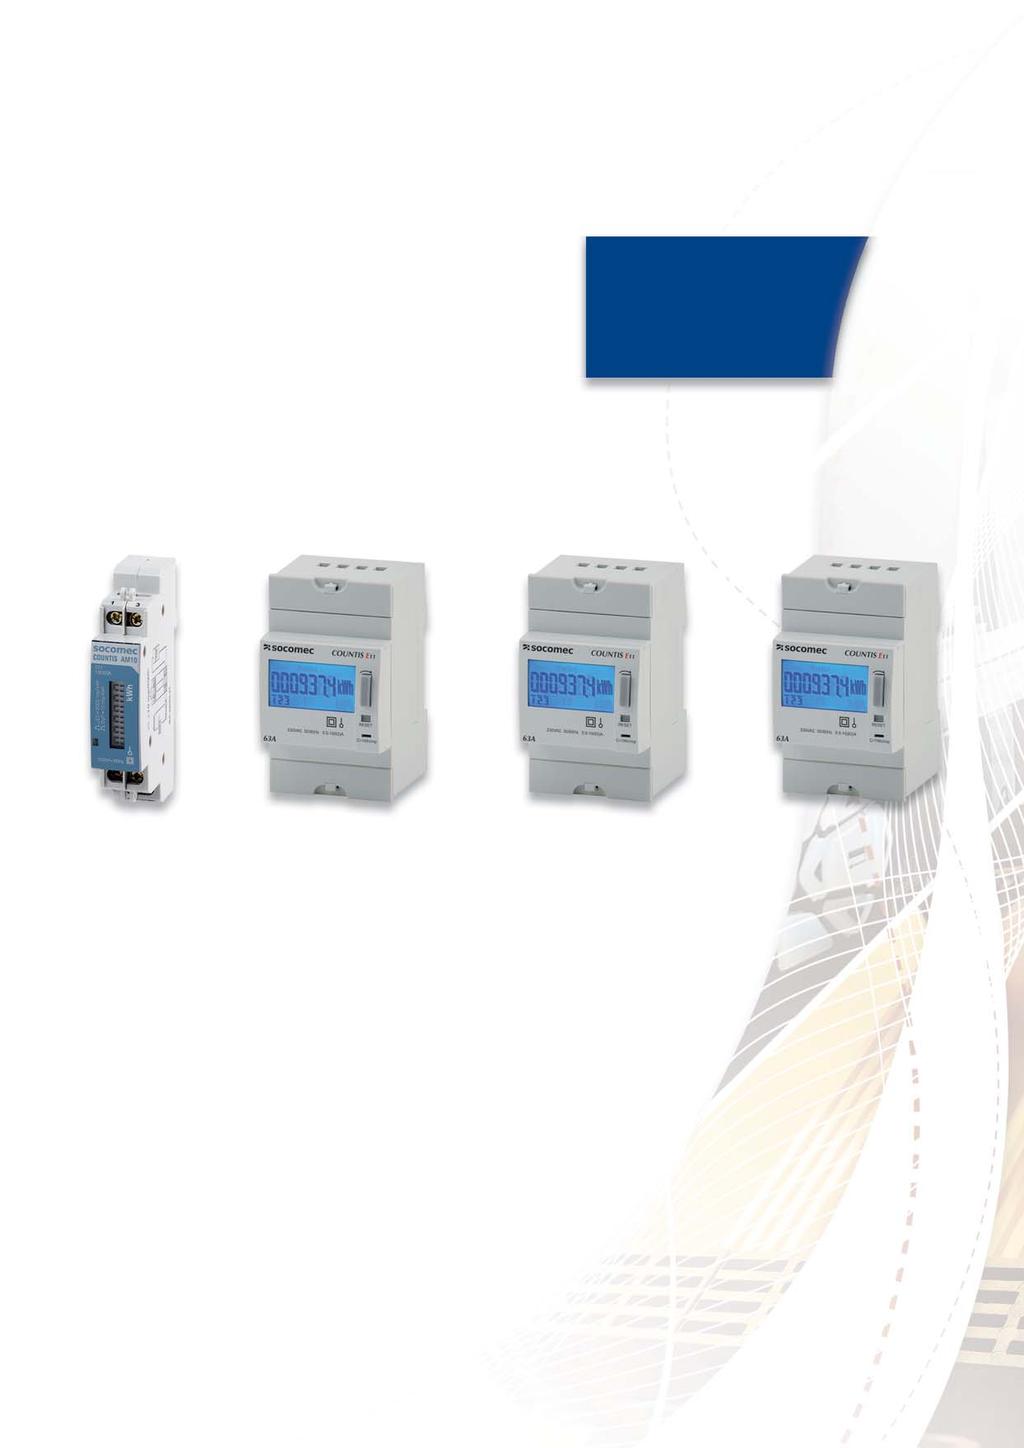 Countis Energy Metering Type Connection Max Rating kwh Metering Single Phase Direct 63A Features: - Direct connect single-phase kwh meter up to 63 Amps (ph/n). - Class 1 to IEC 62053-21.